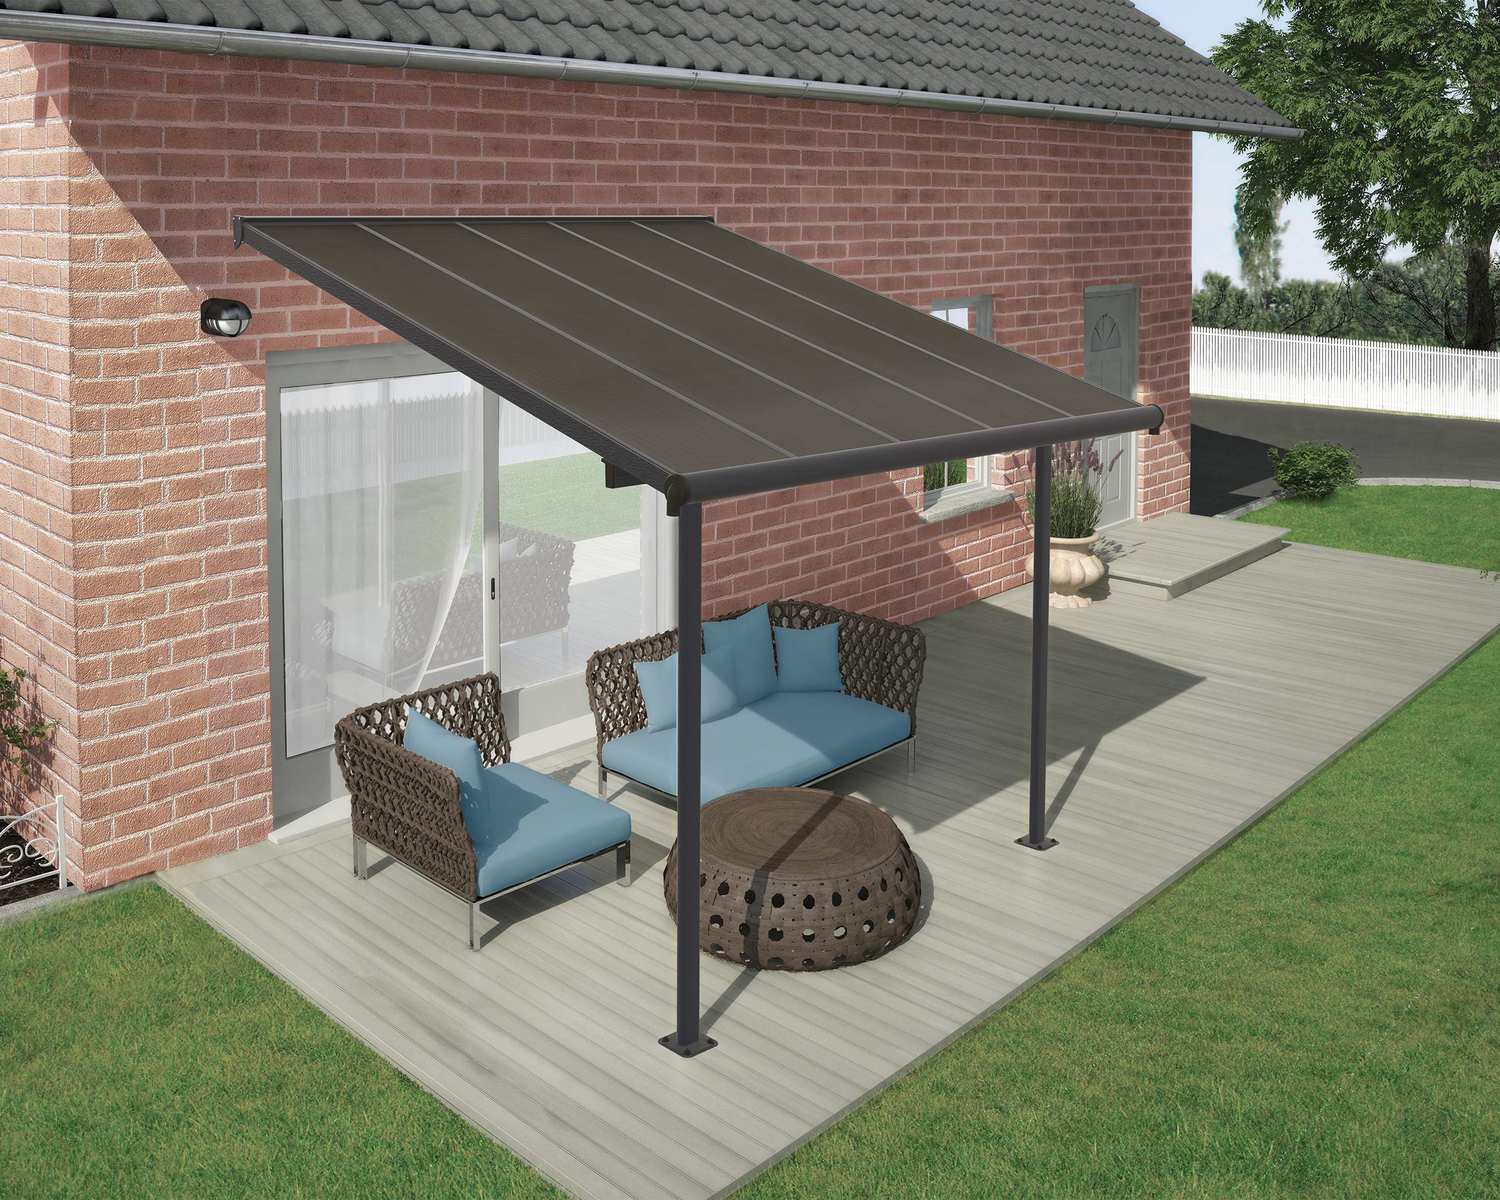 Capri 10 ft. x 10 ft. Grey Aluminium Patio Cover with 2 Posts Attached to House that Covers Patio Outdoor Furniture.